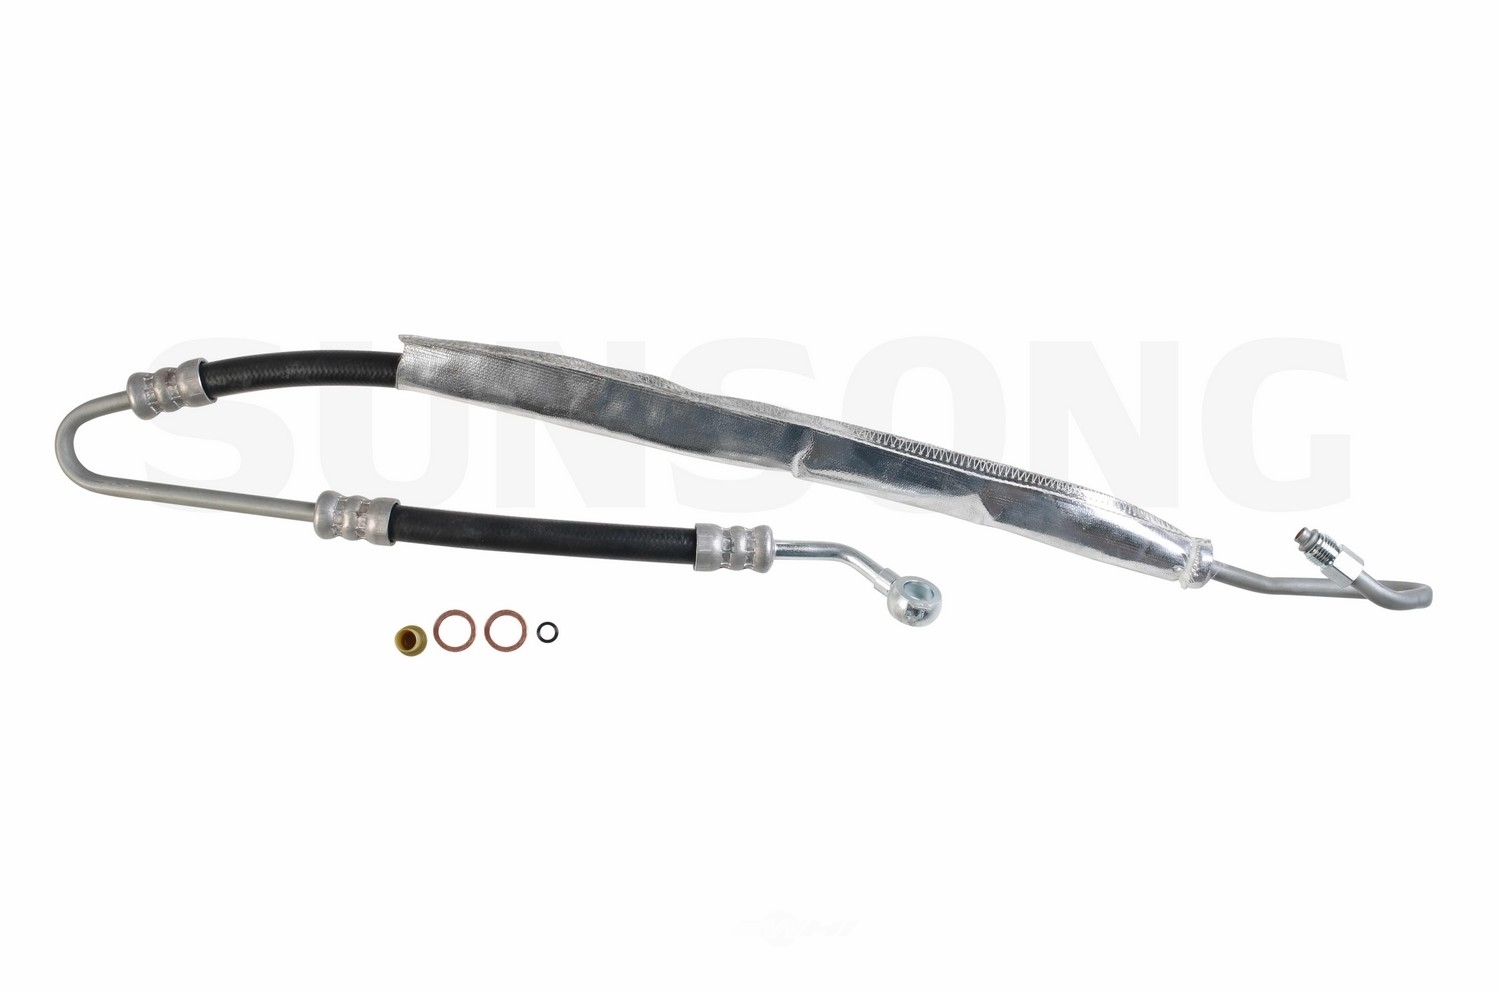 Power Steering Pressure Line Hose Assembly-Pressure Line Assembly fits Sienna